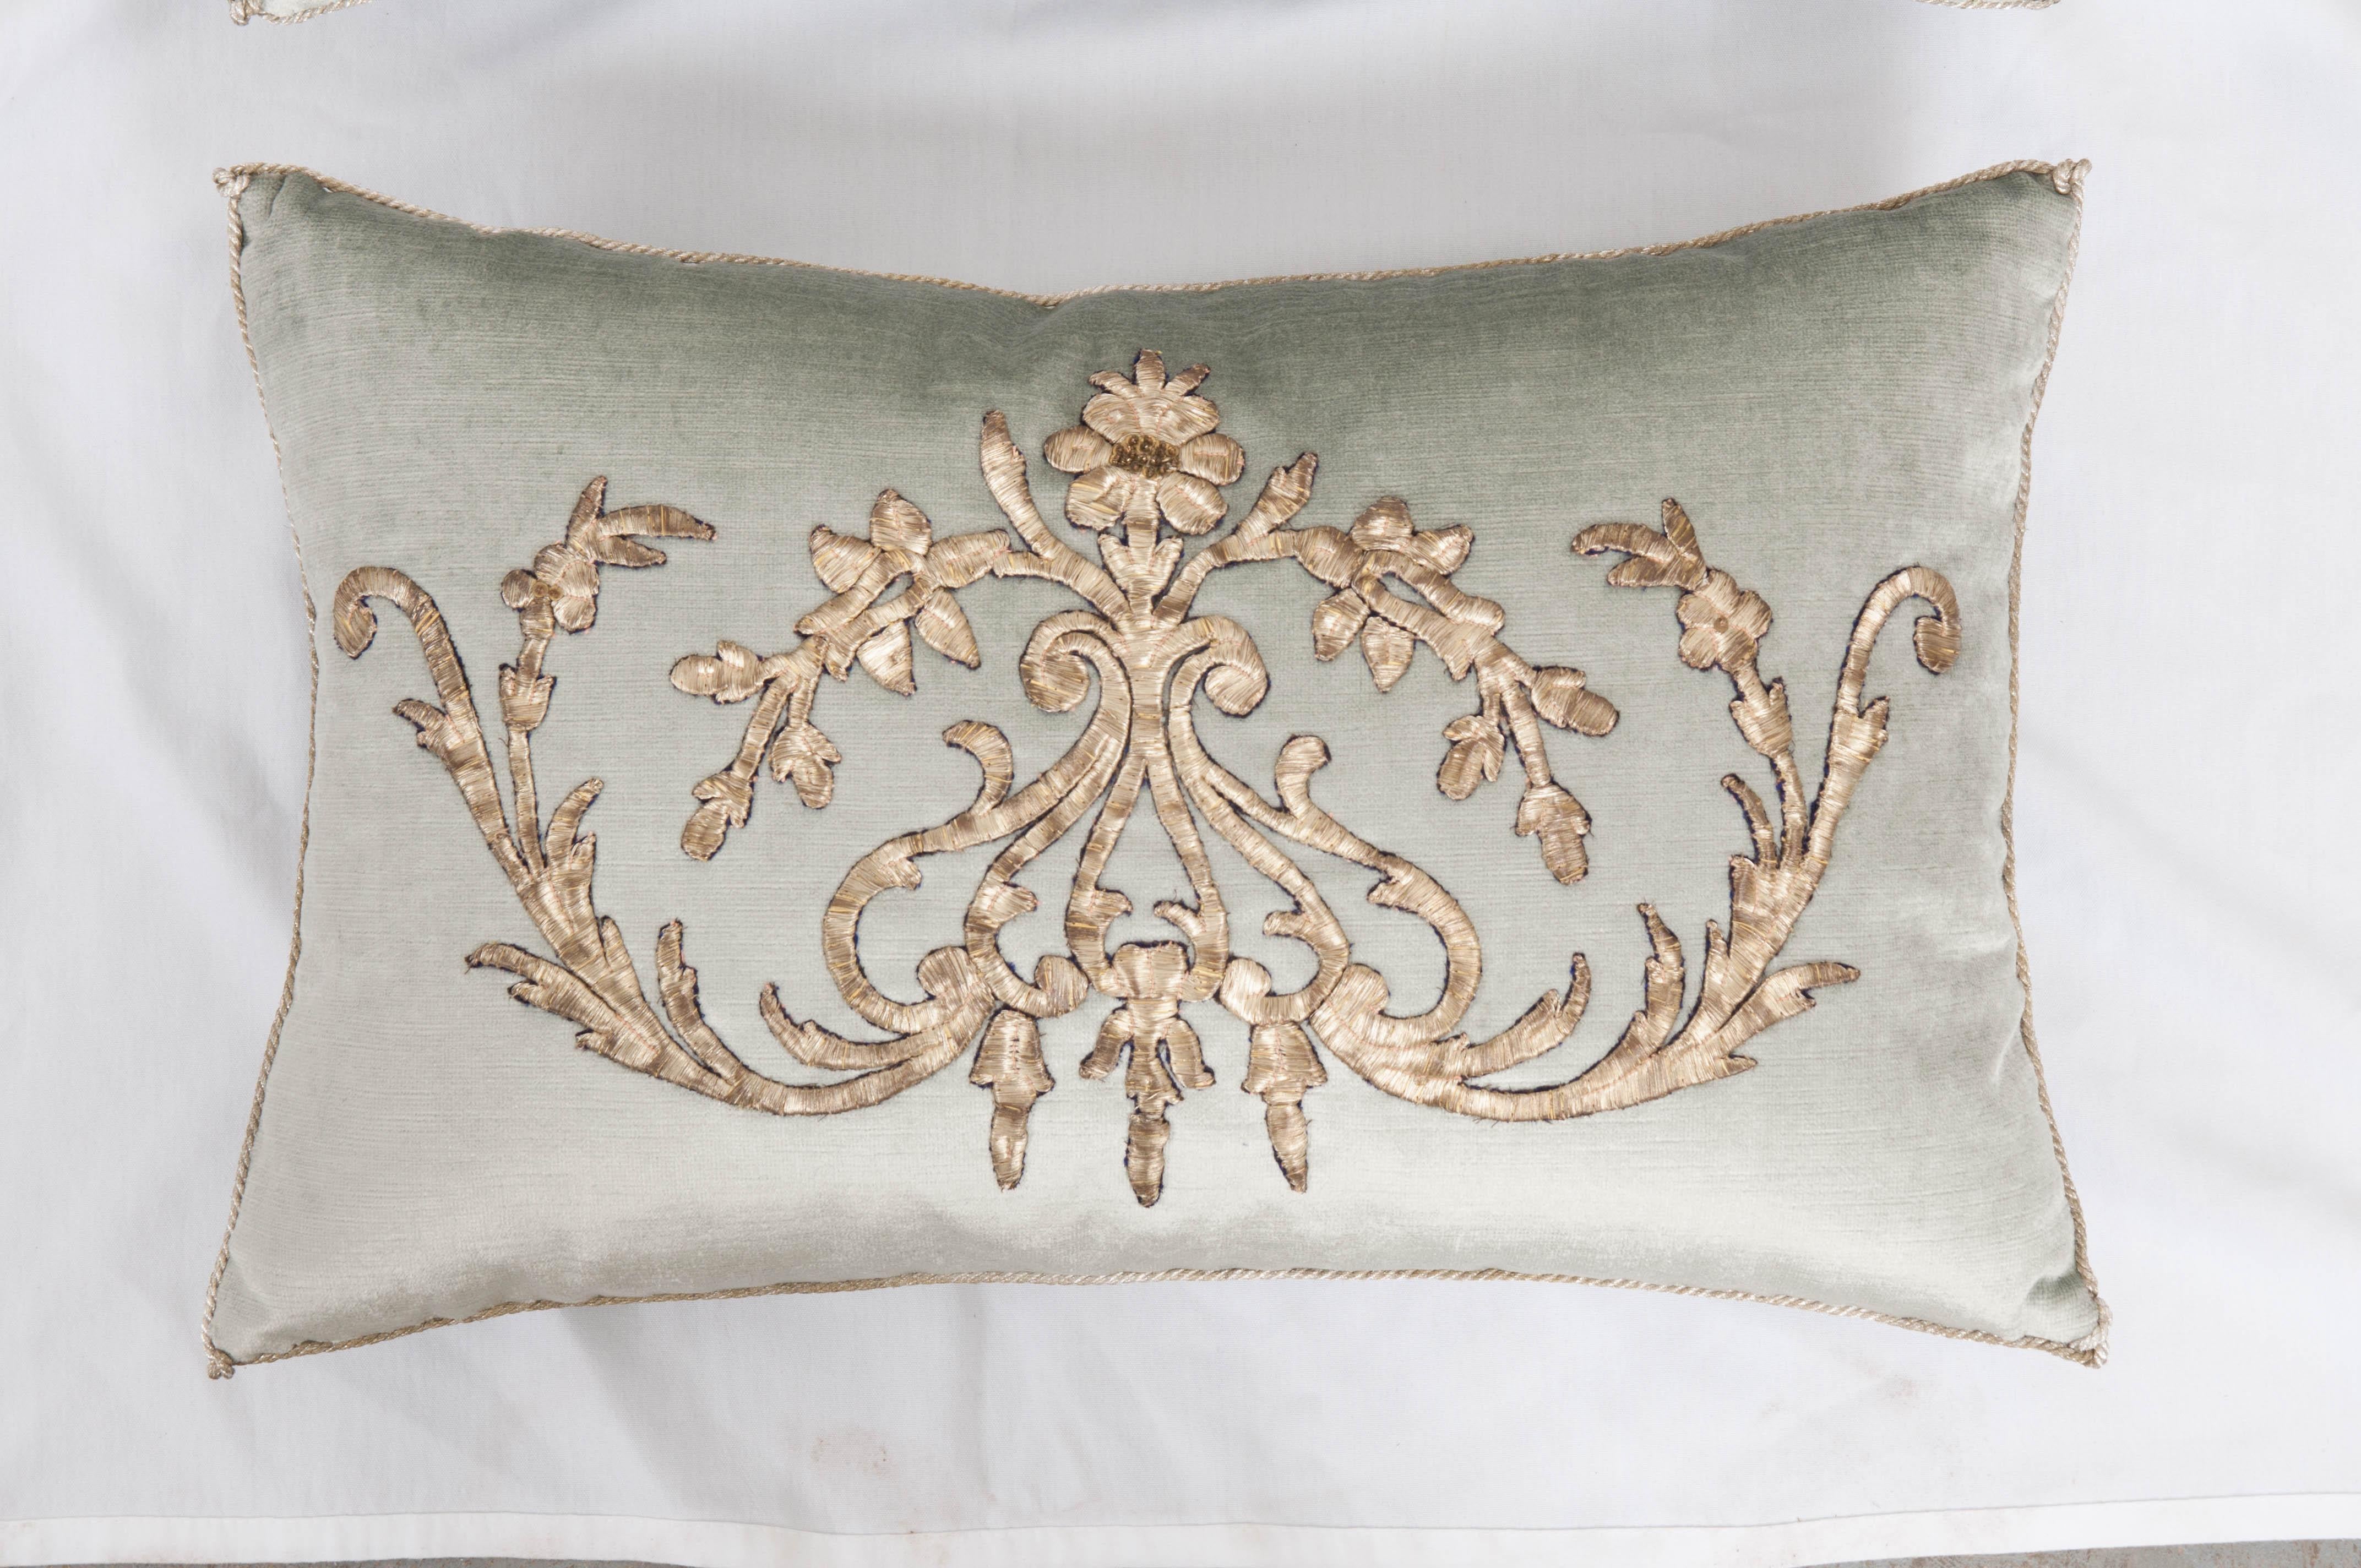 Antique Ottoman Empire raised silver metallic embroidery on pale French blue velvet. Hand-trimmed with vintage silver metallic cording which is knotted in the corners. Designed by Becky Vizard for B. Viz Designs. Note: Available for individual